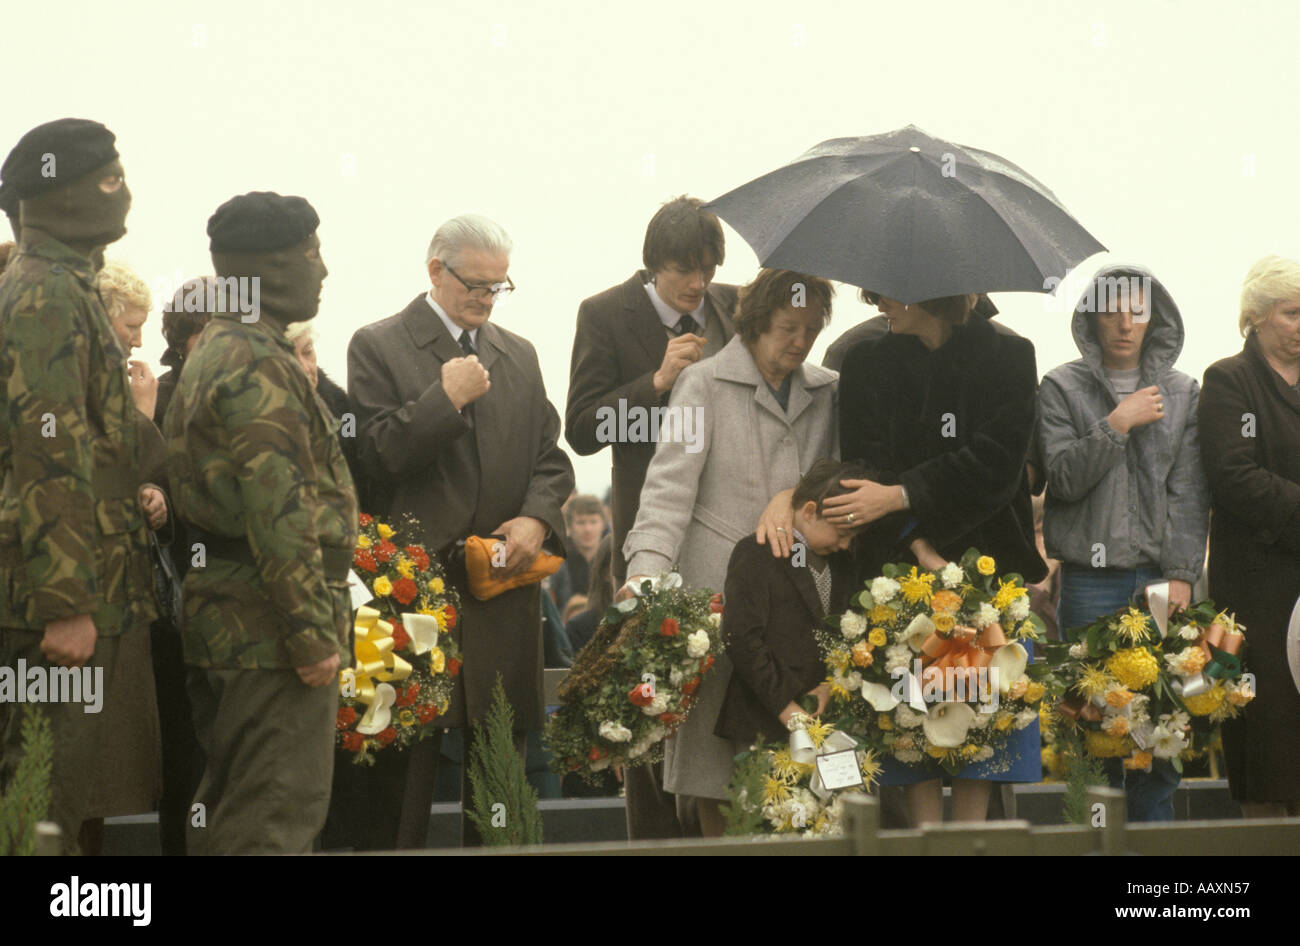 Bobby Sands funeral 1981 The Troubles 1980s his wife Geraldine Noade Sands and son Gerard  Milltown cemetery Belfast Northern Ireland UK HOMER SYKES Stock Photo